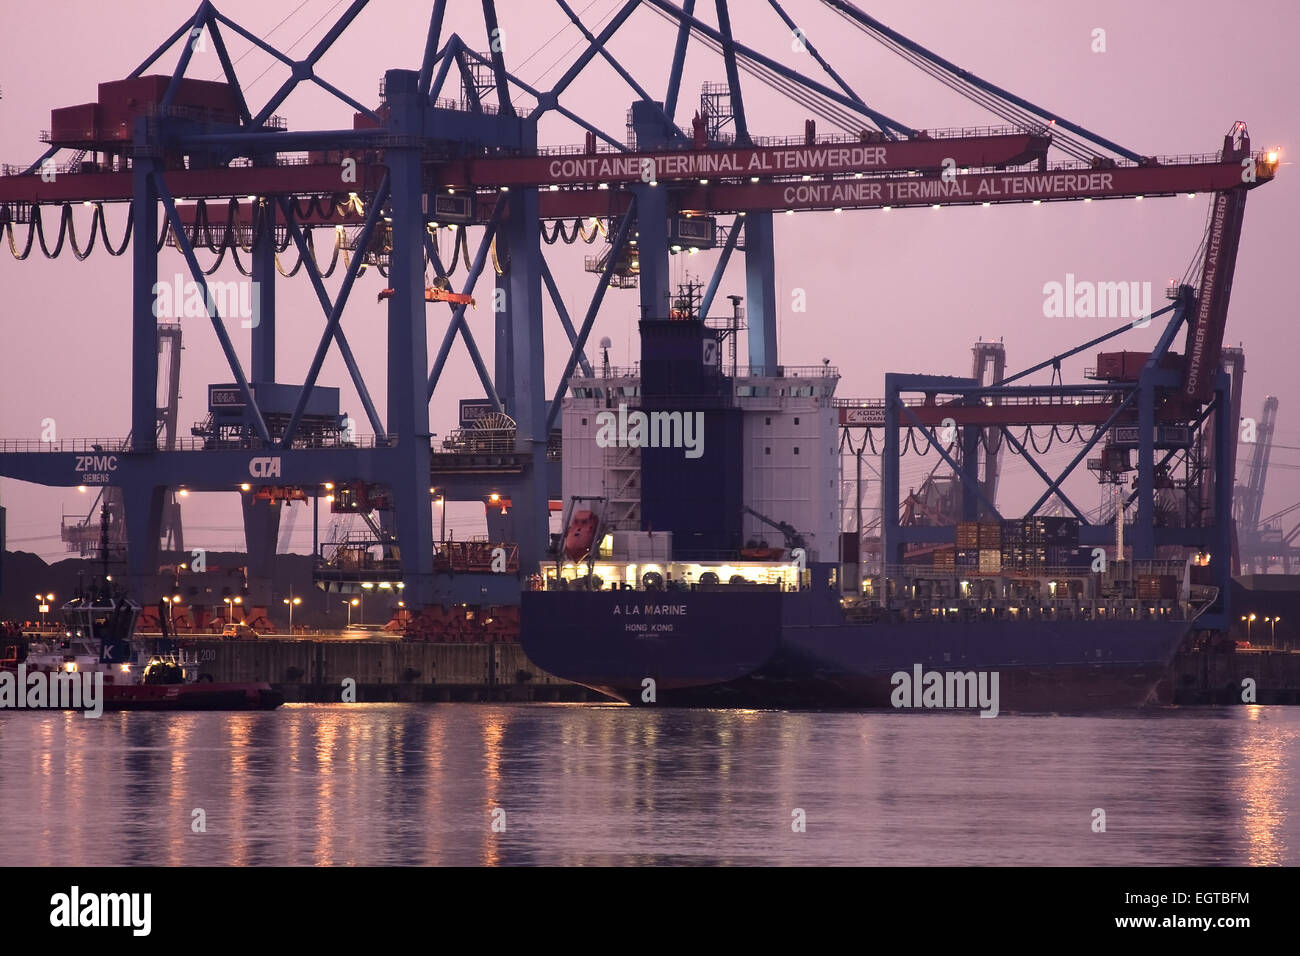 Containererschip is charged at dusk, at Container Terminal Altenwerder, Hamburg harbor, Germany Stock Photo